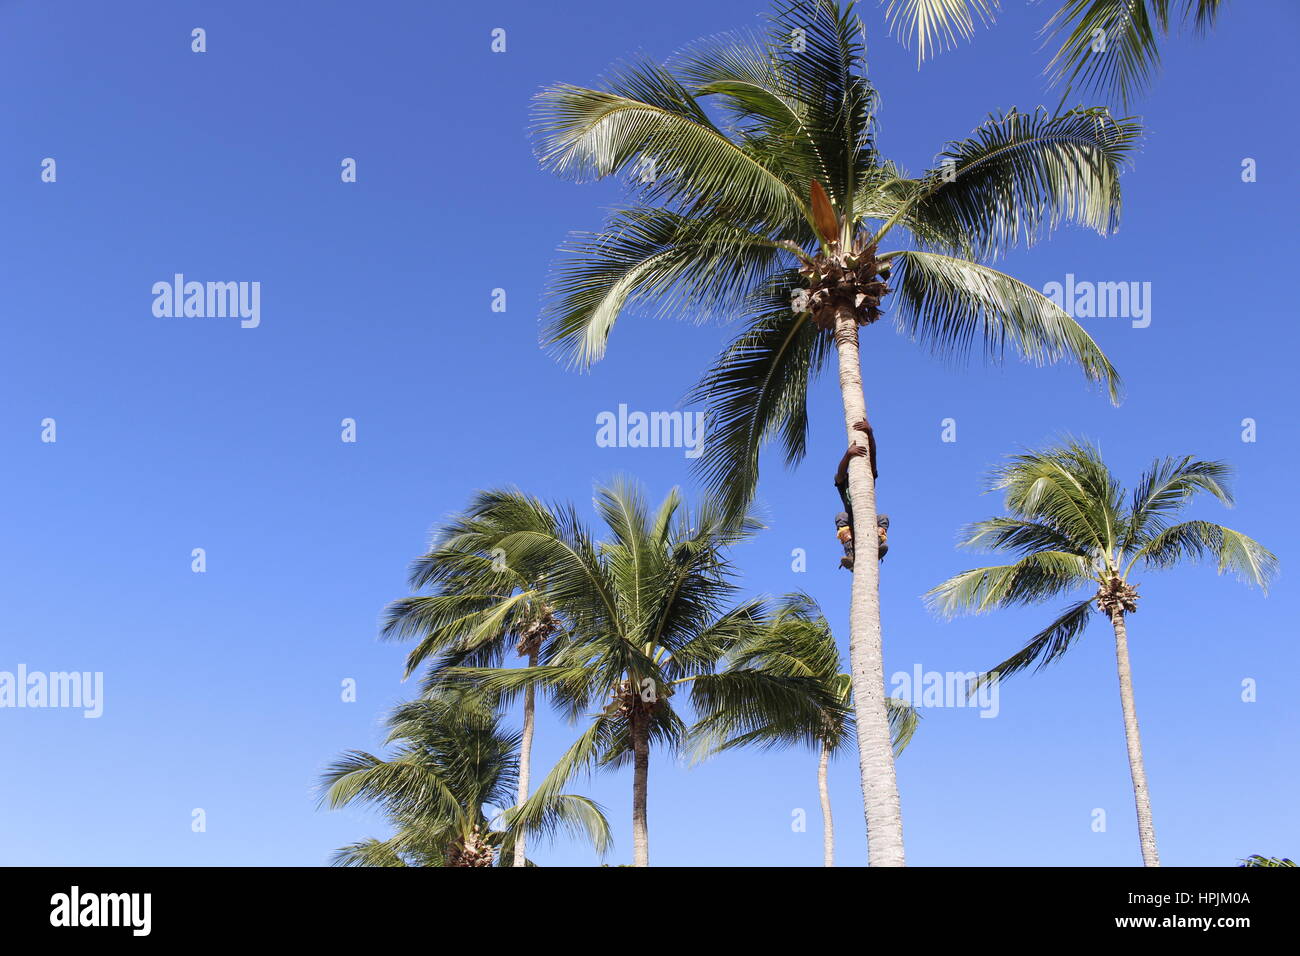 A tree surgeon climbing a palm tree to cut the palms, Hastings, Barbados, Caribbean Stock Photo